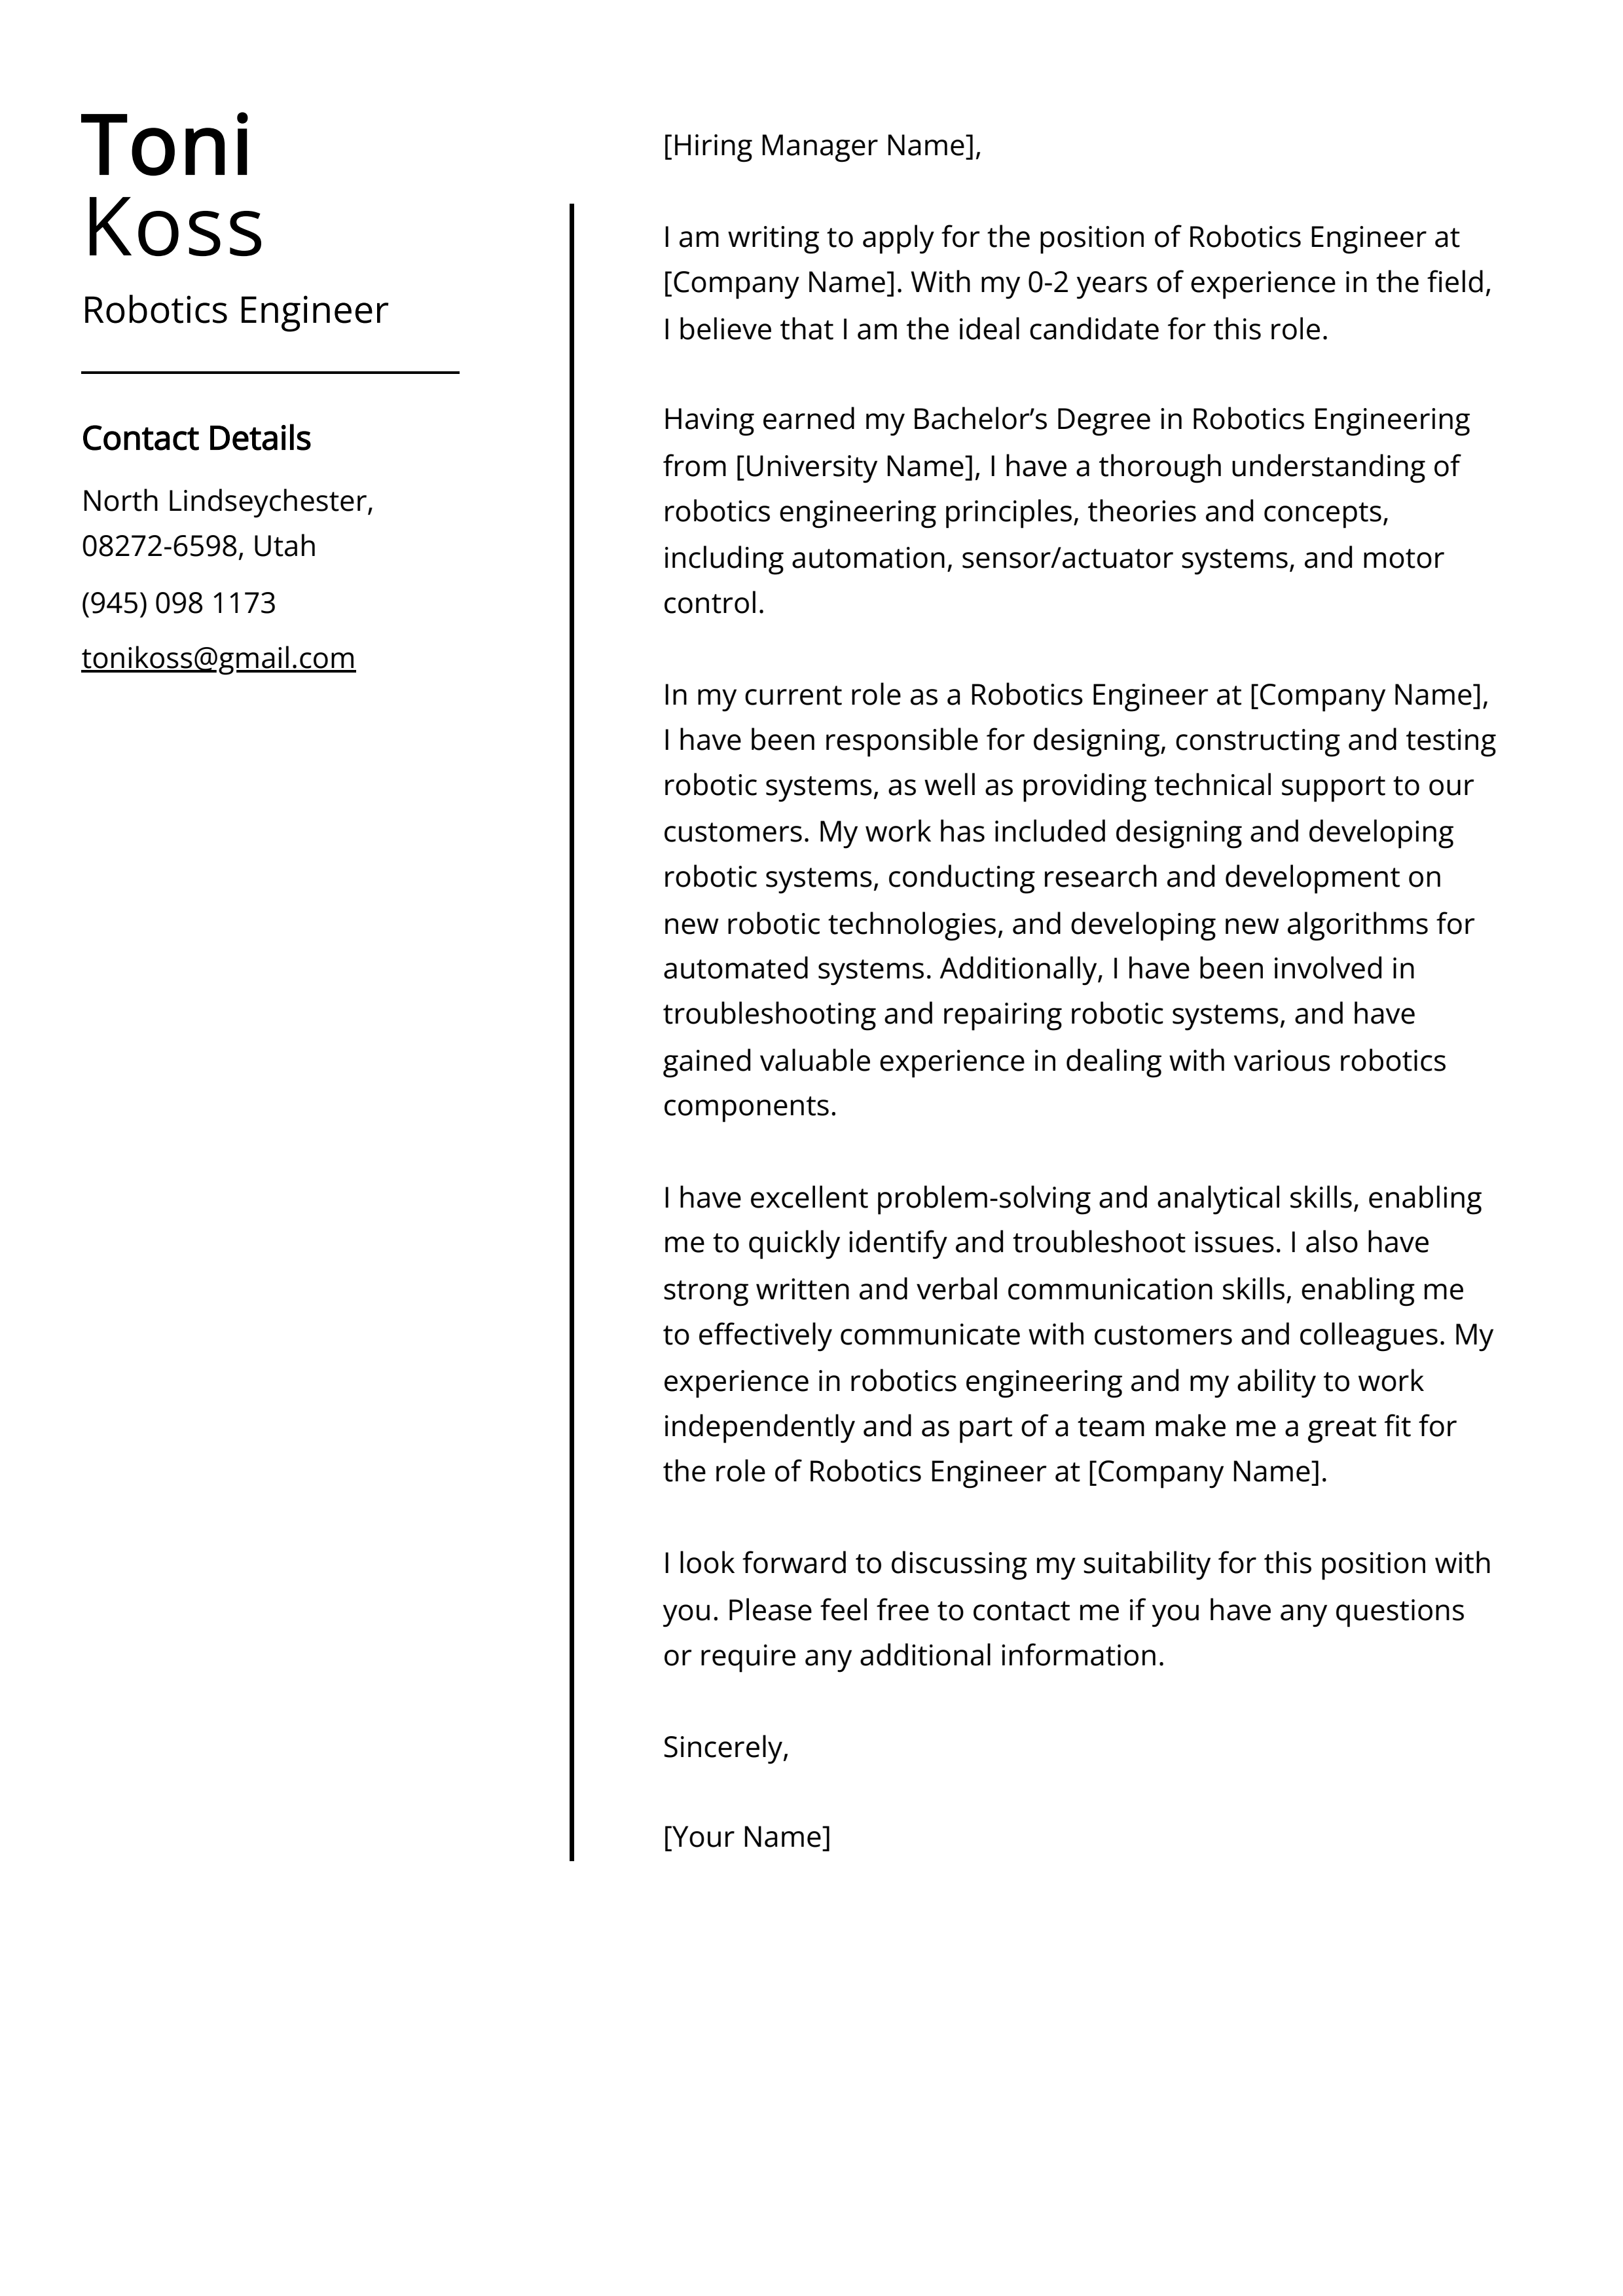 Robotics Engineer Cover Letter Example